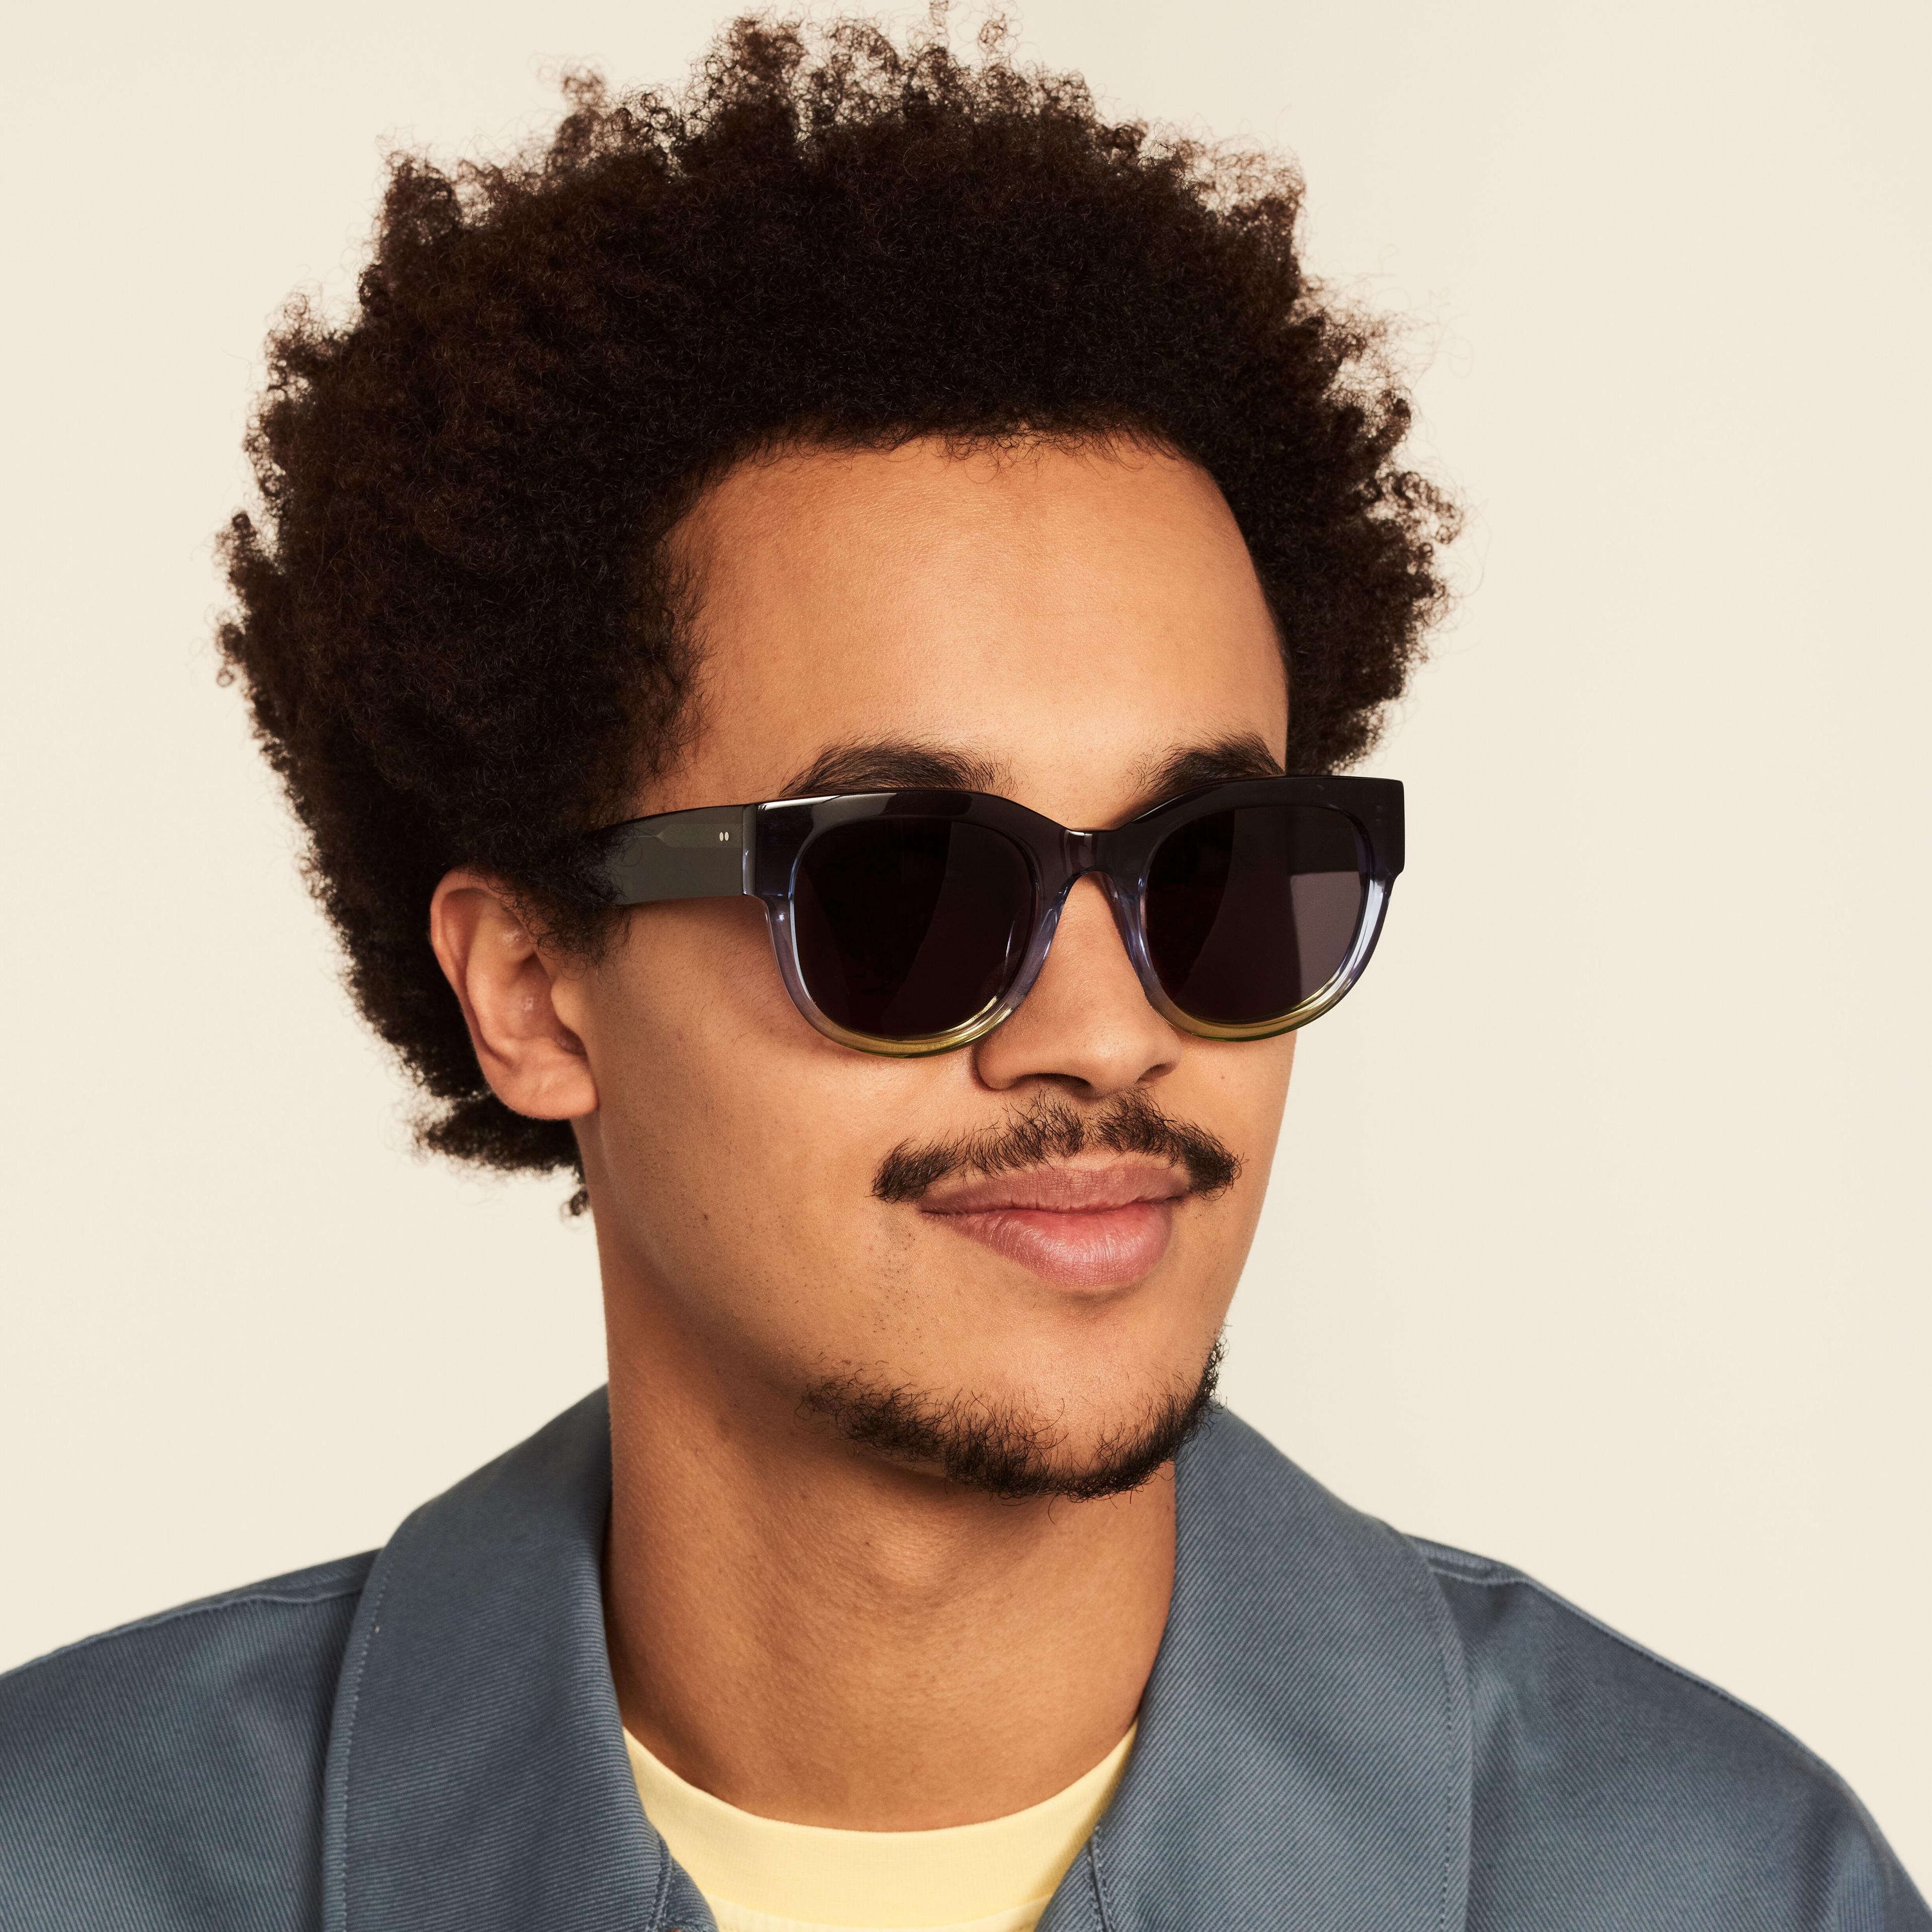 Ace & Tate Sunglasses | Round Acetate in Blue, Yellow